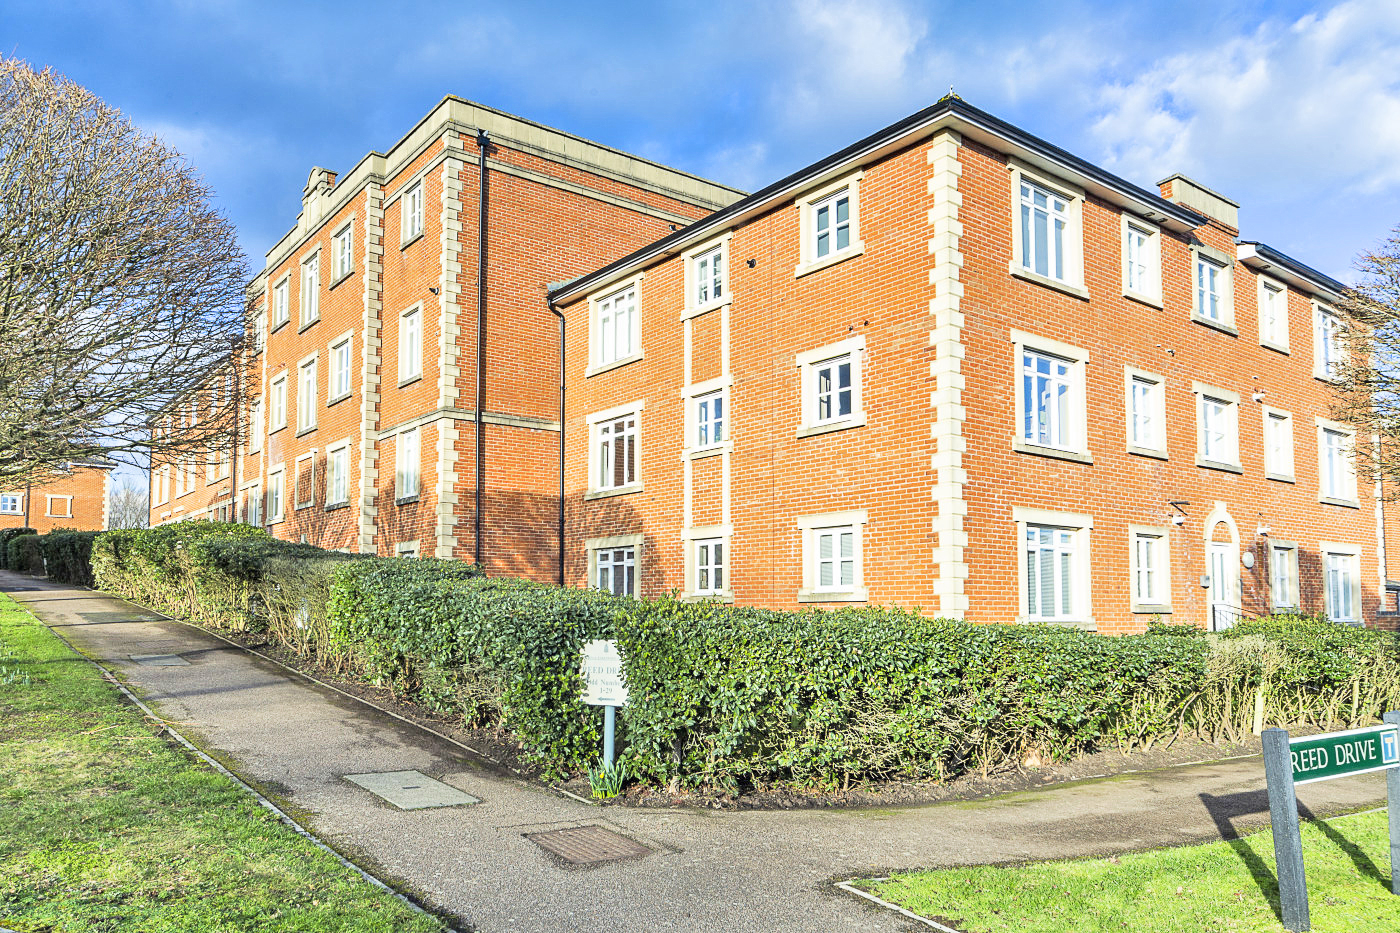 Reed Drive, Royal Earlswood Park, Redhill, Surrey RH1